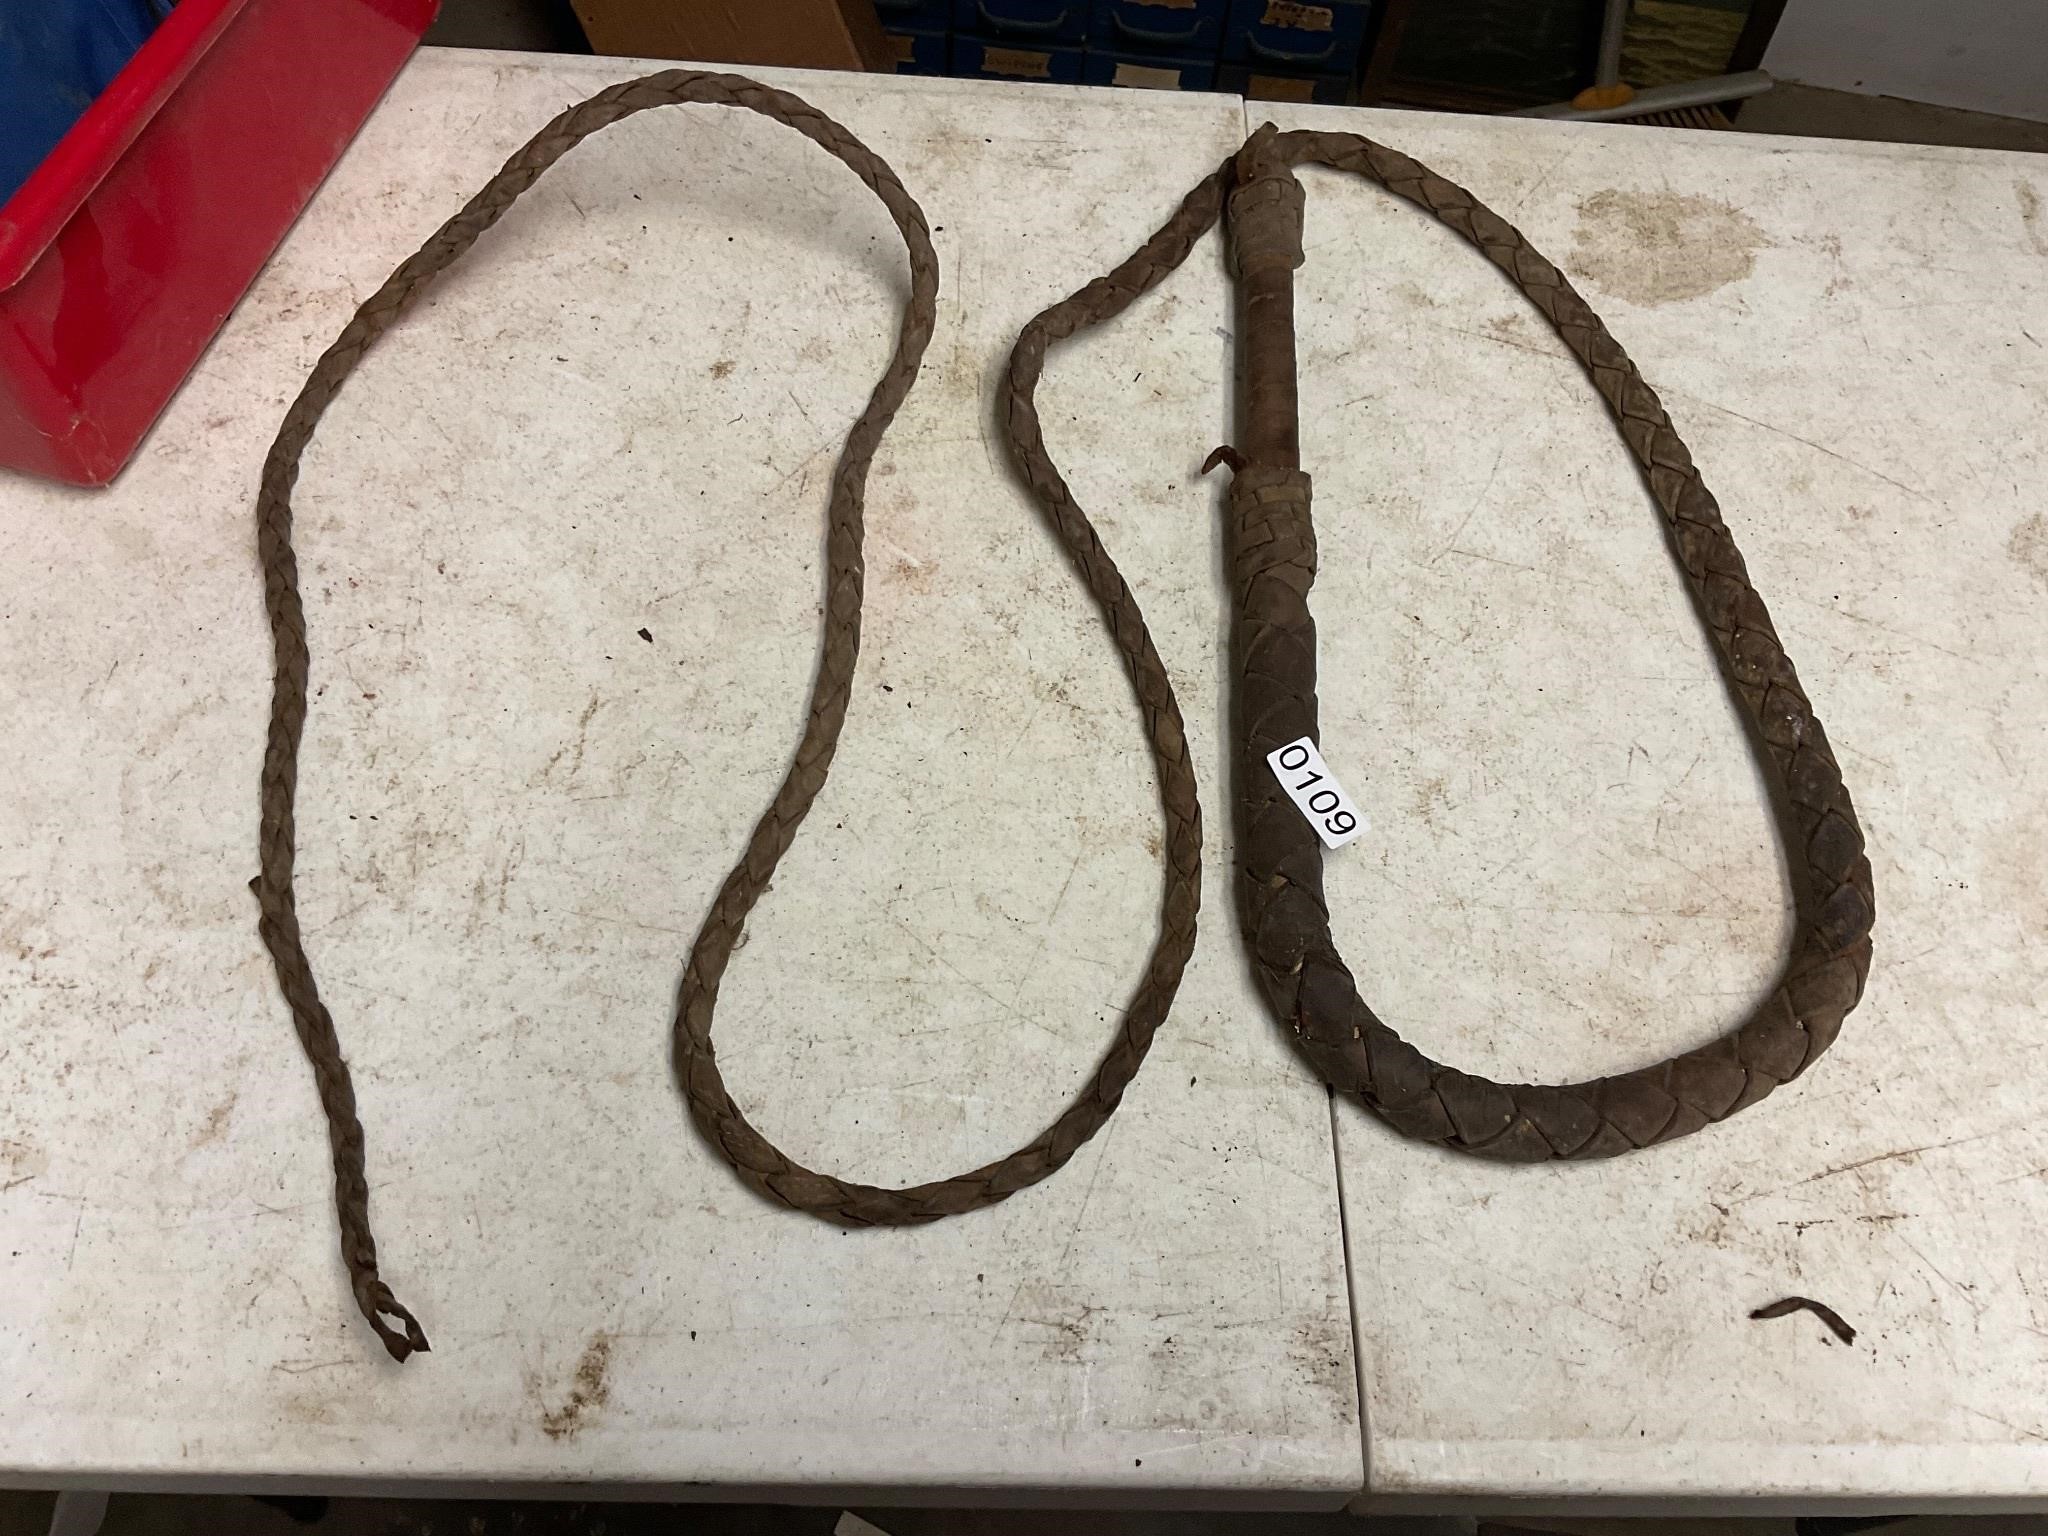 Bullwhip- as pictured